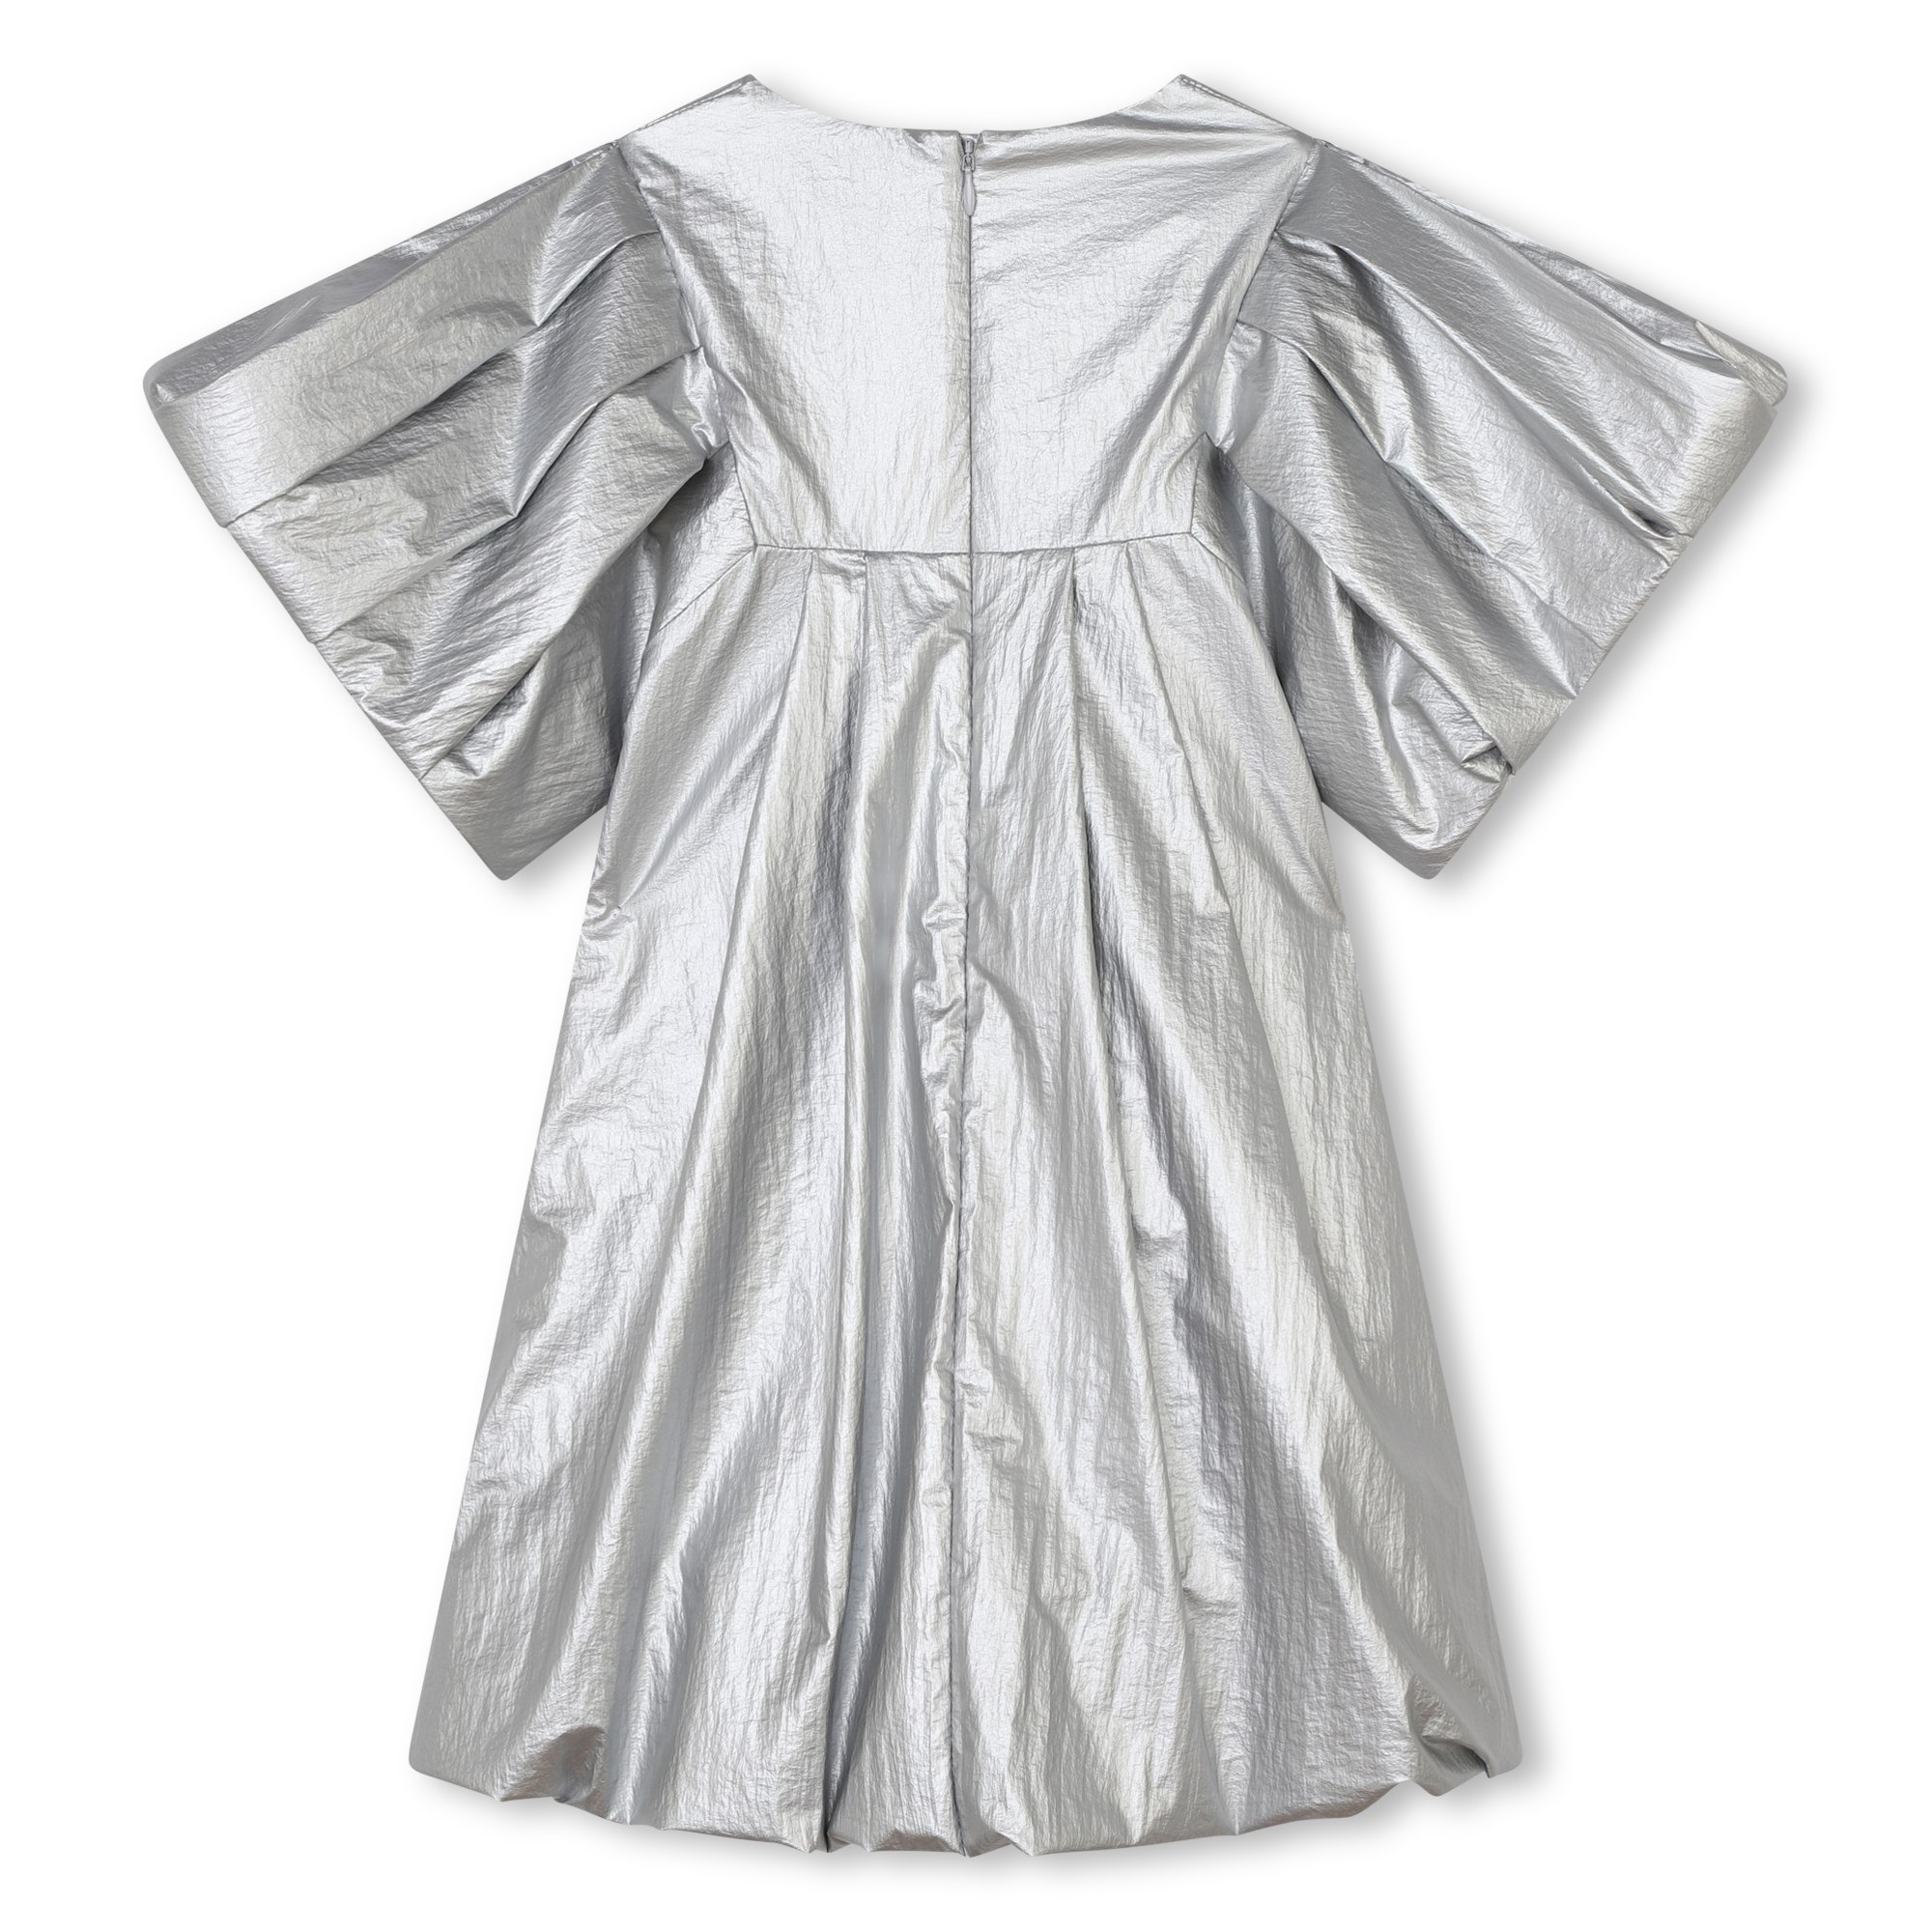 Metallic party dress MARC JACOBS for GIRL